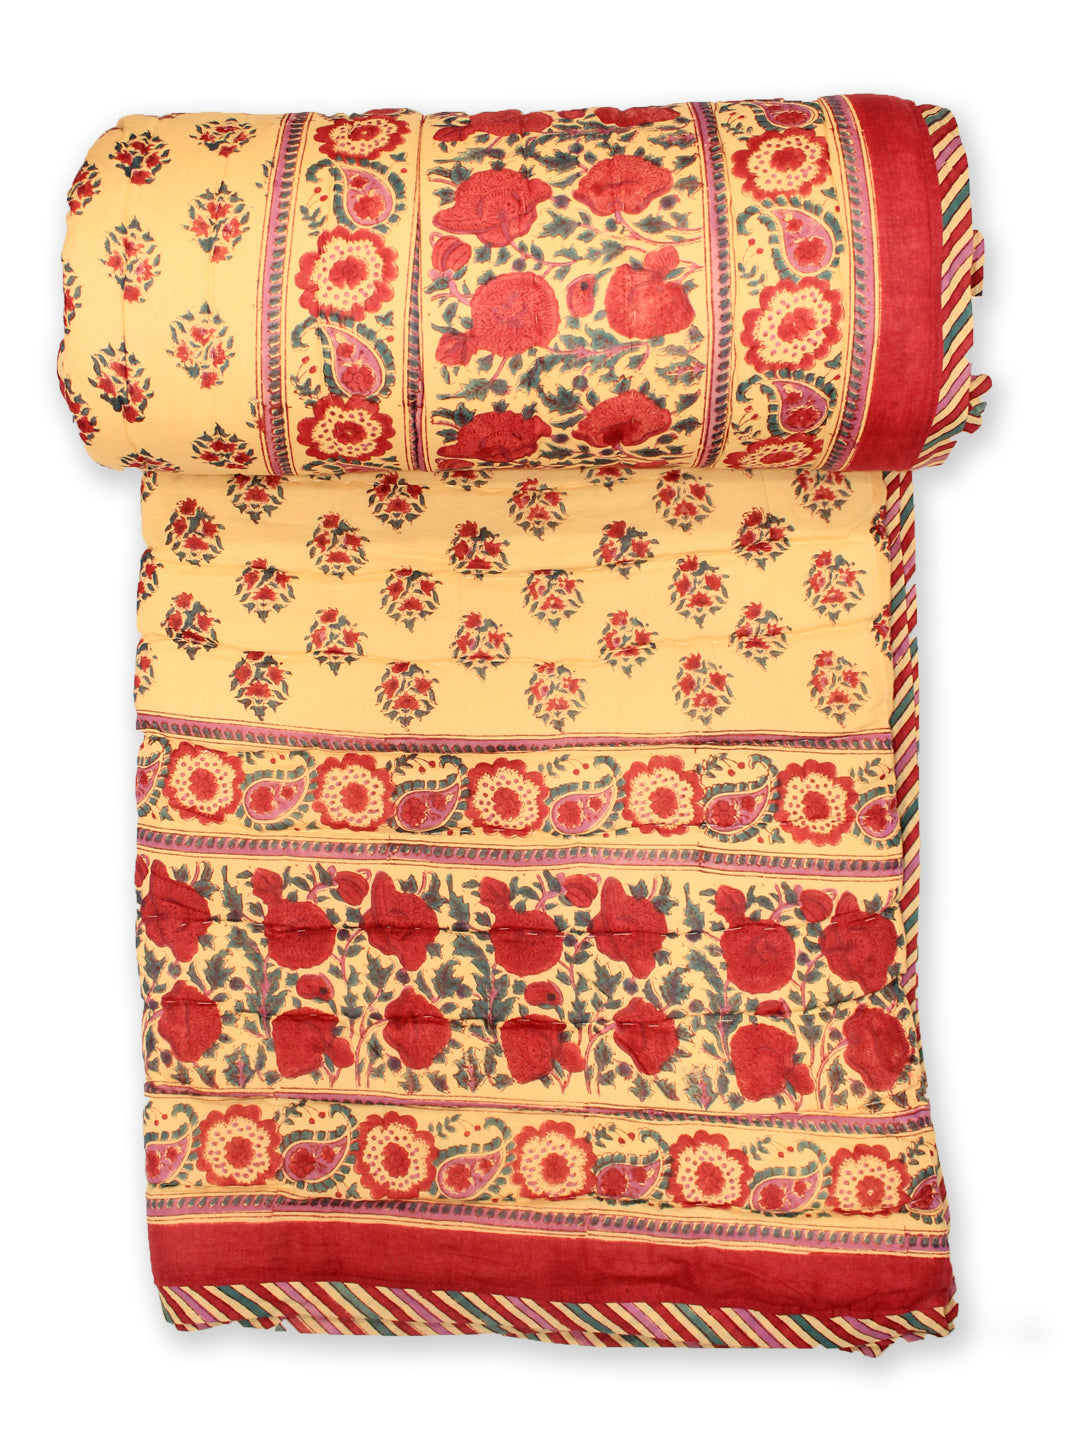 Quilt Chattha Jaal Hand Block Print in Red